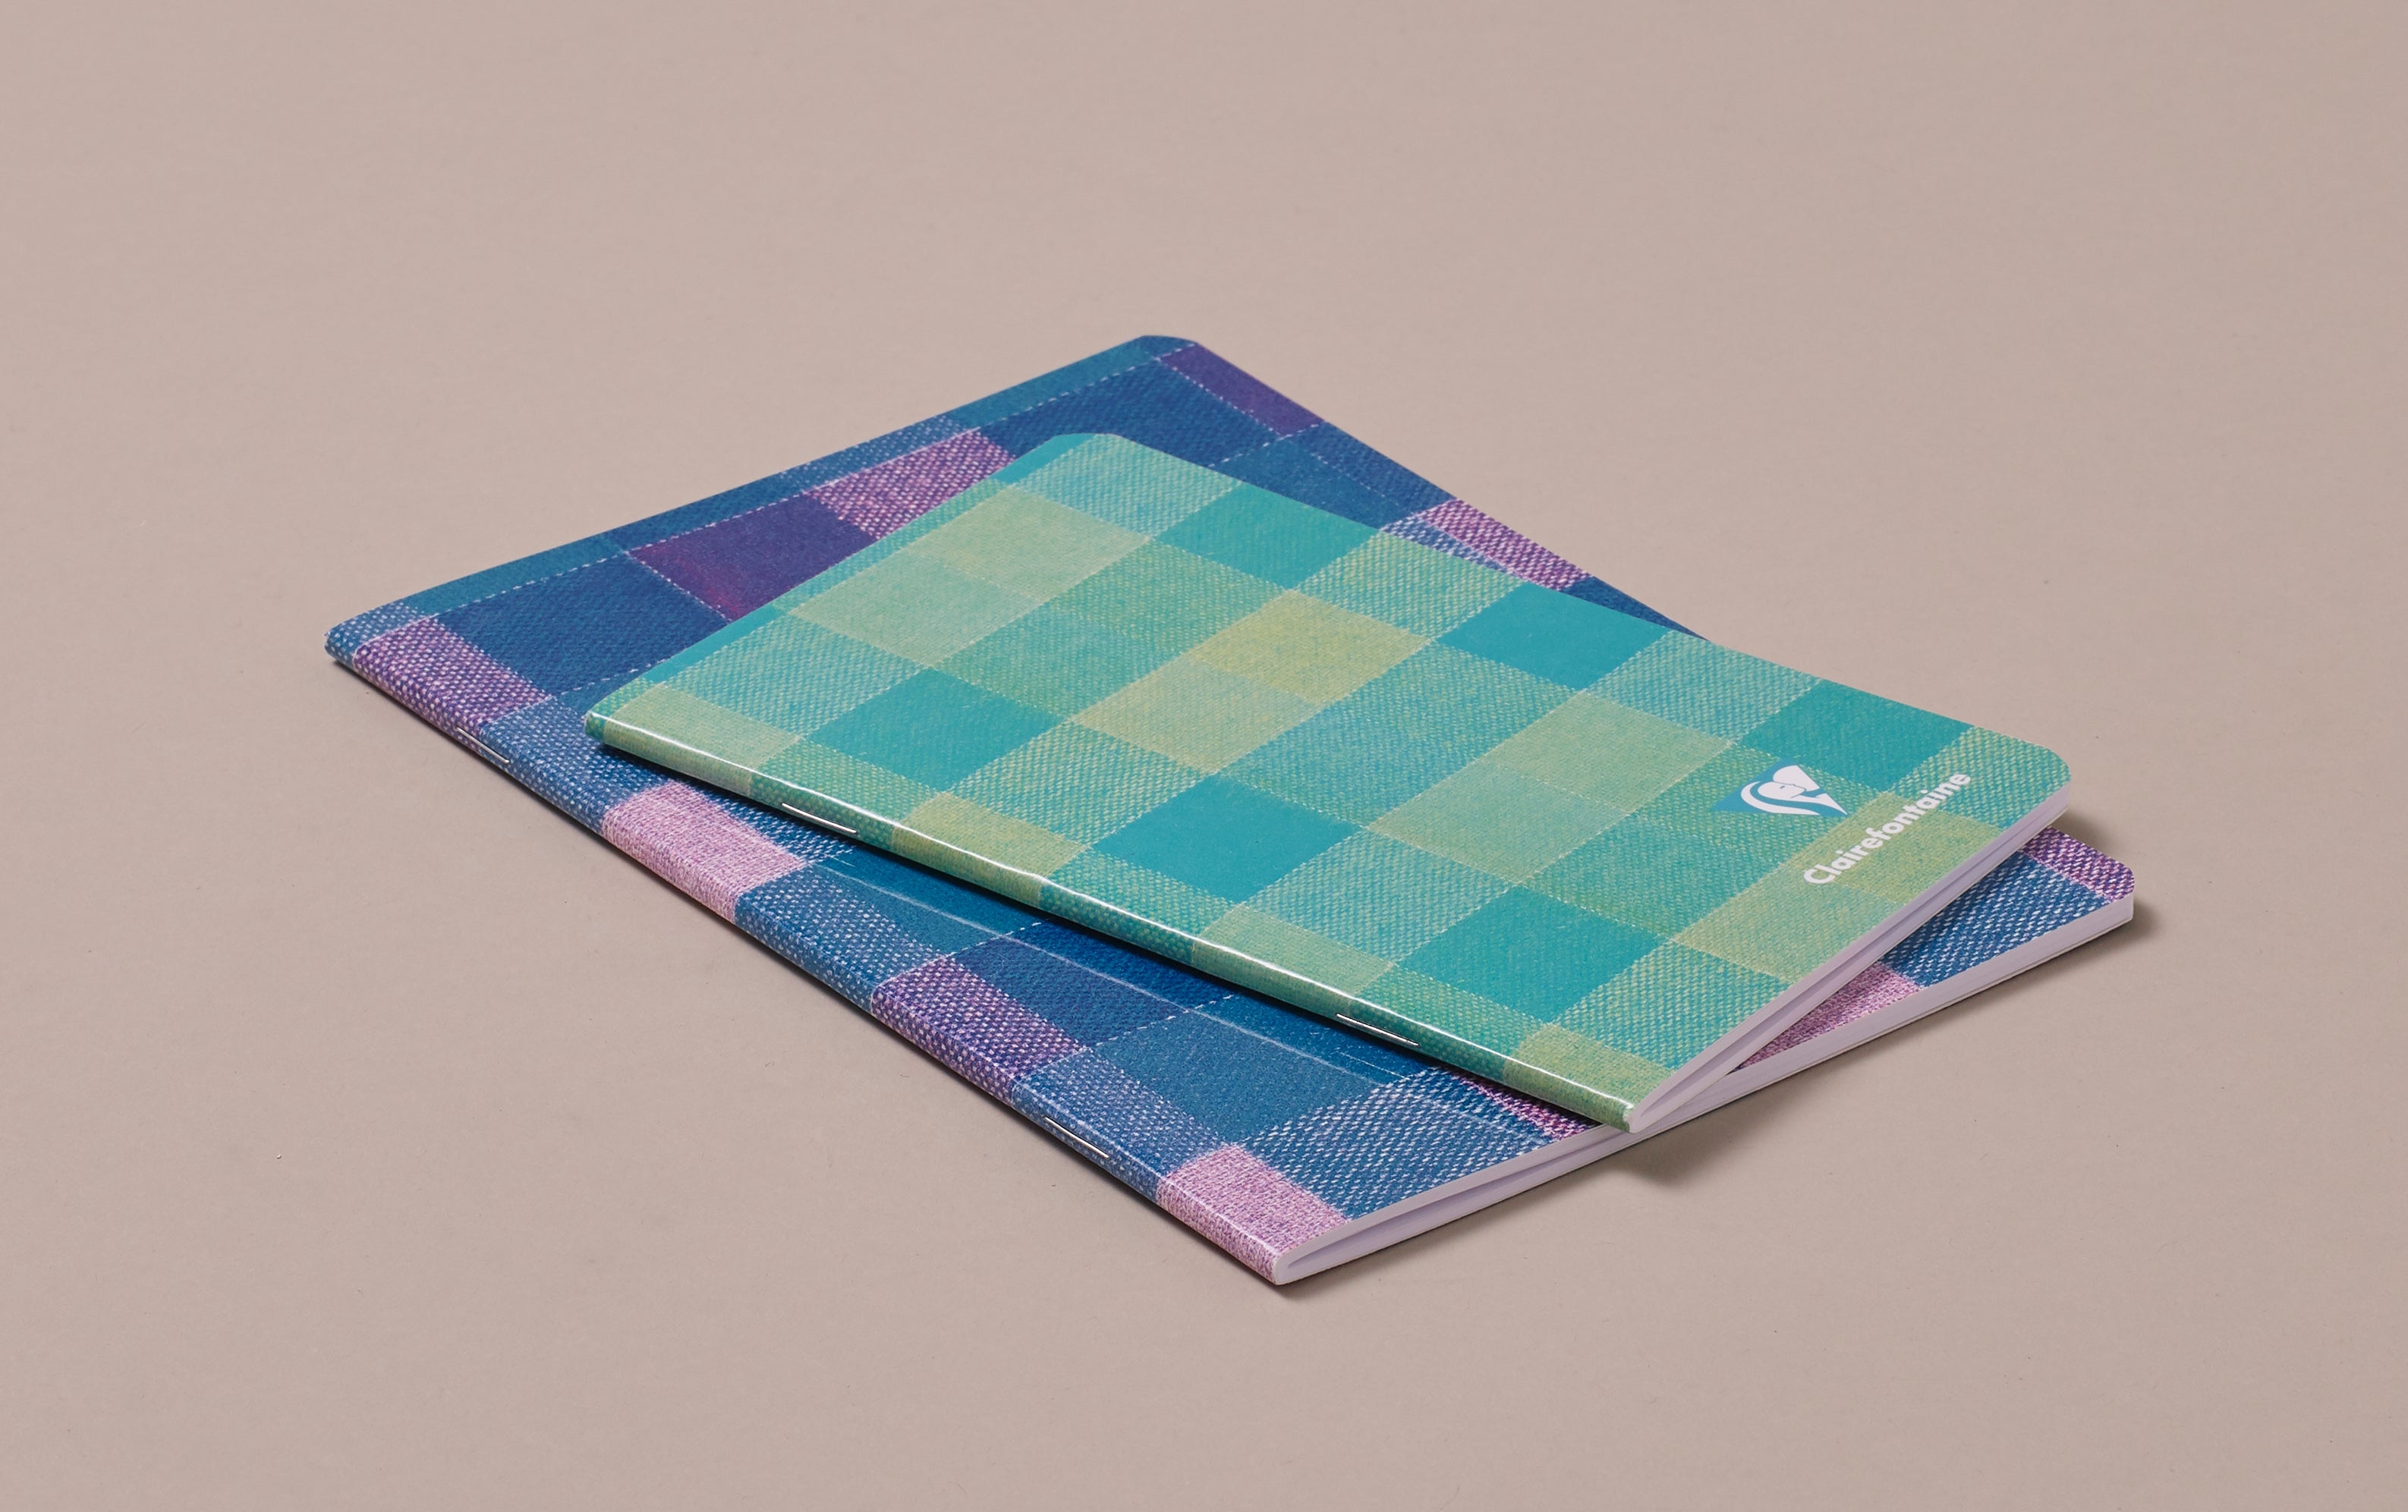 1990 Special Edition "Madras" Clairefontaine Notebook